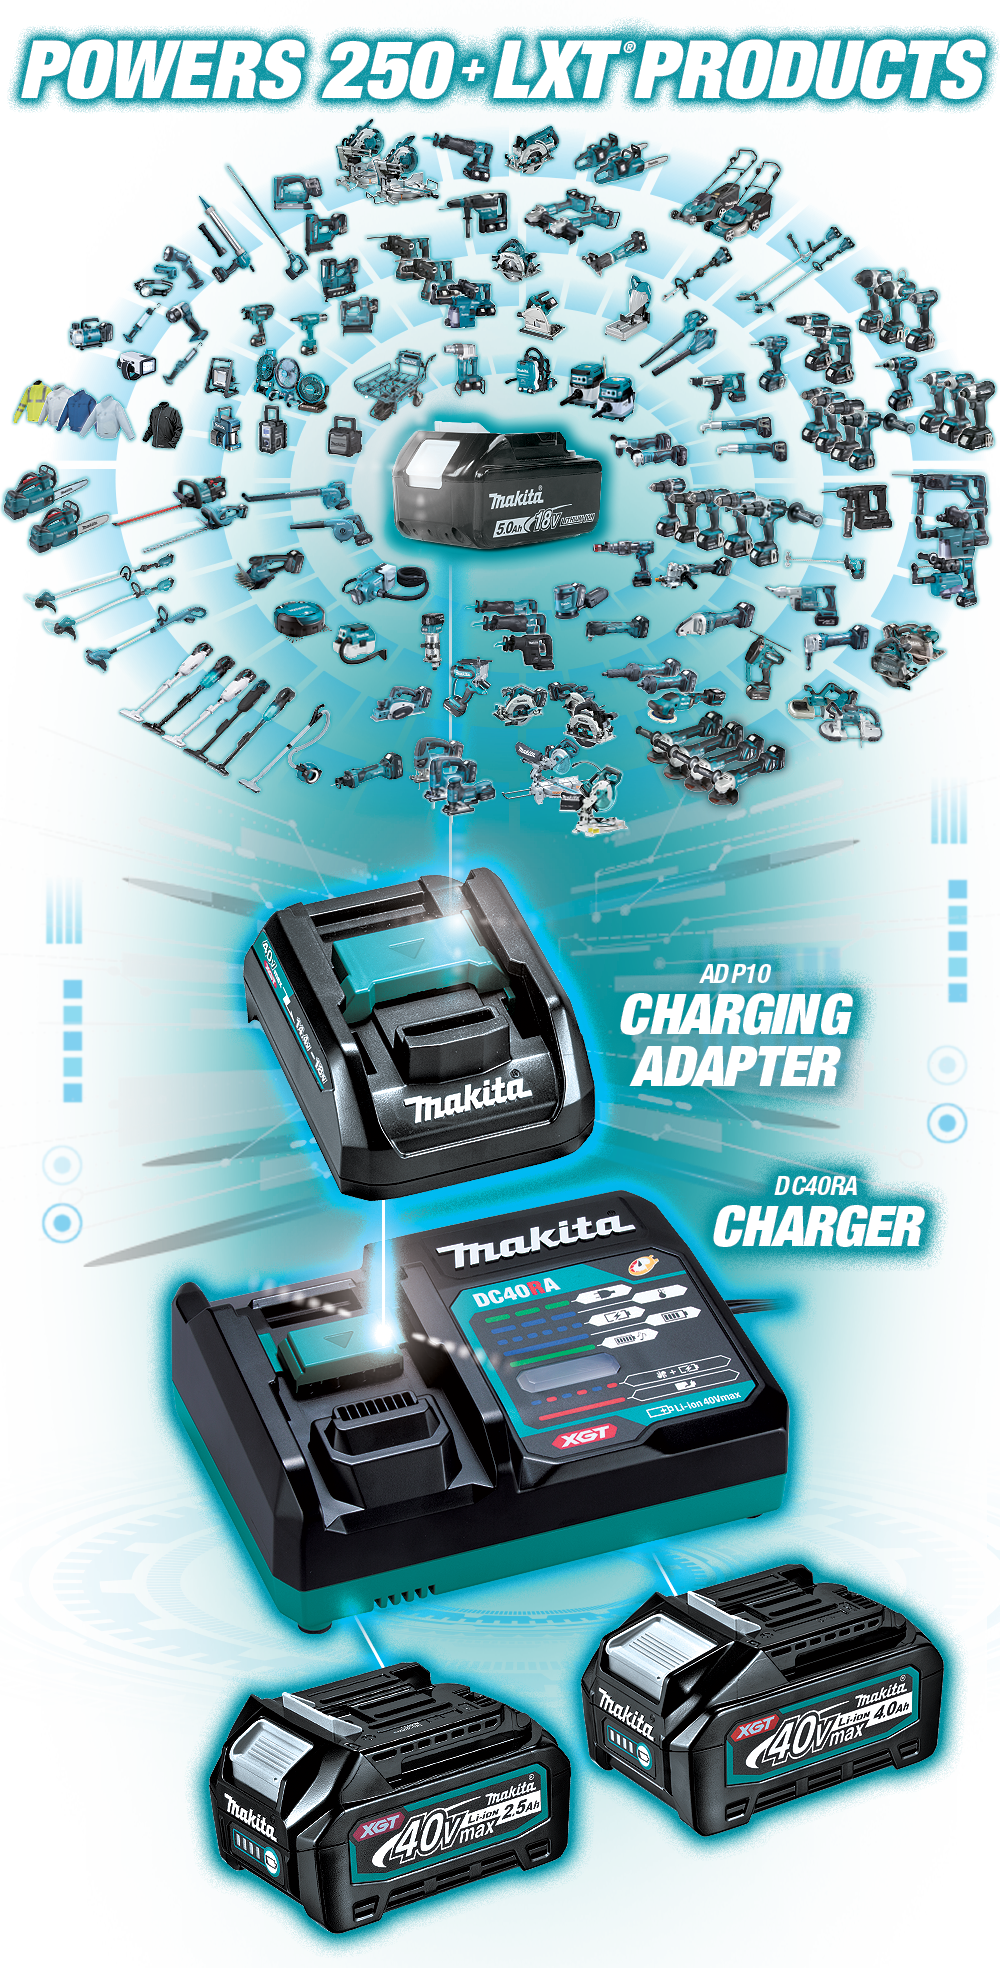 forskel Et hundrede år Marco Polo Makita - Introducing Makita XGT 40Vmax Lithium-ion